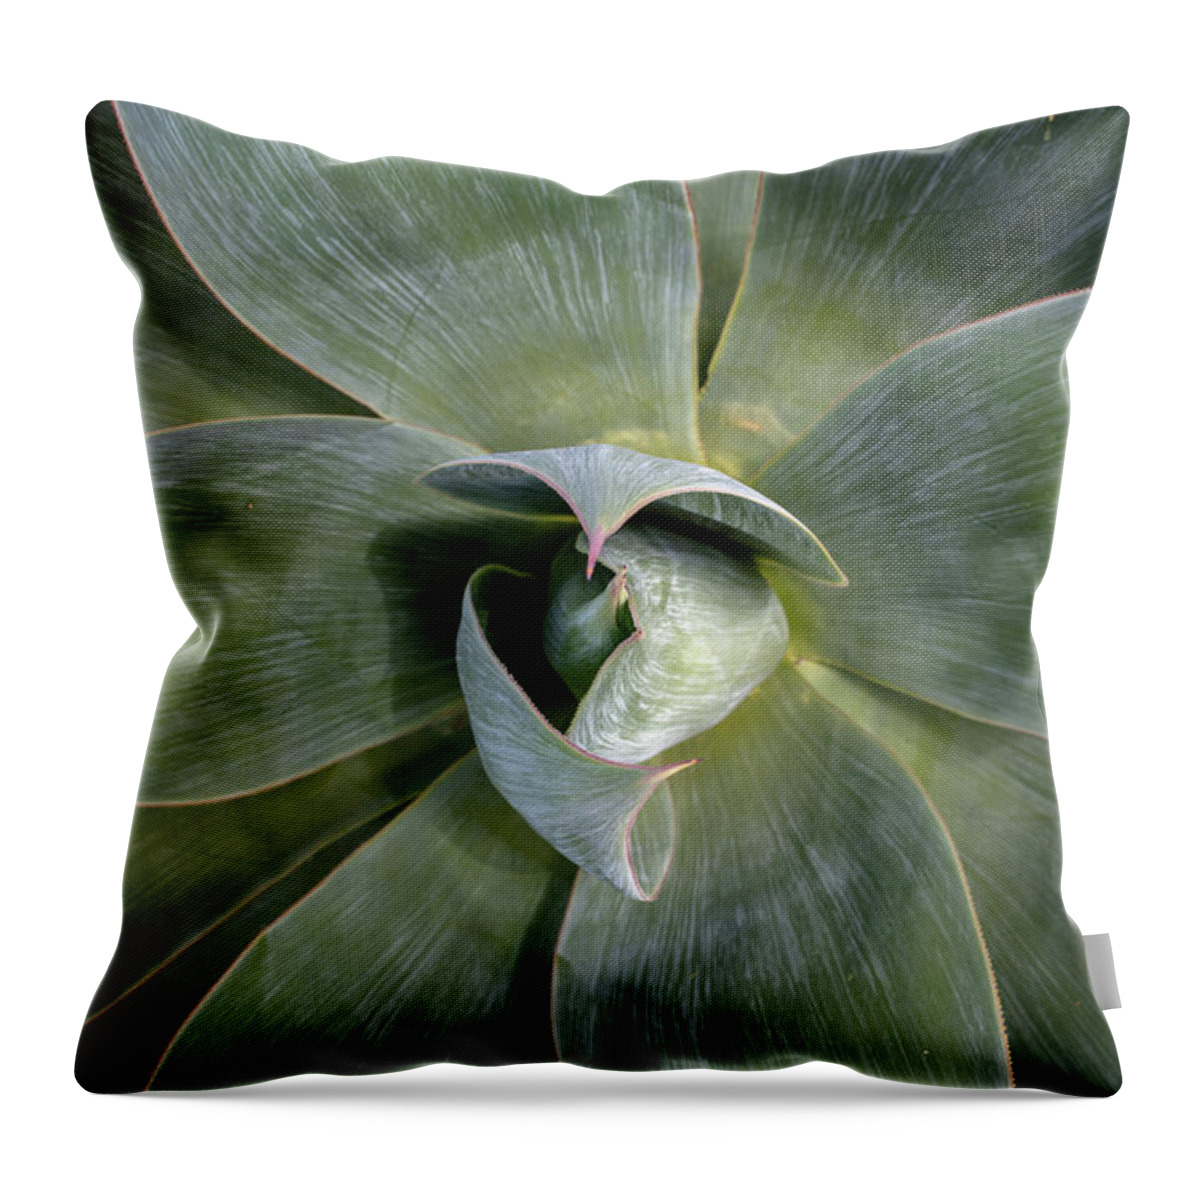 Agave Throw Pillow featuring the photograph Blue Flame Agave by Alison Frank